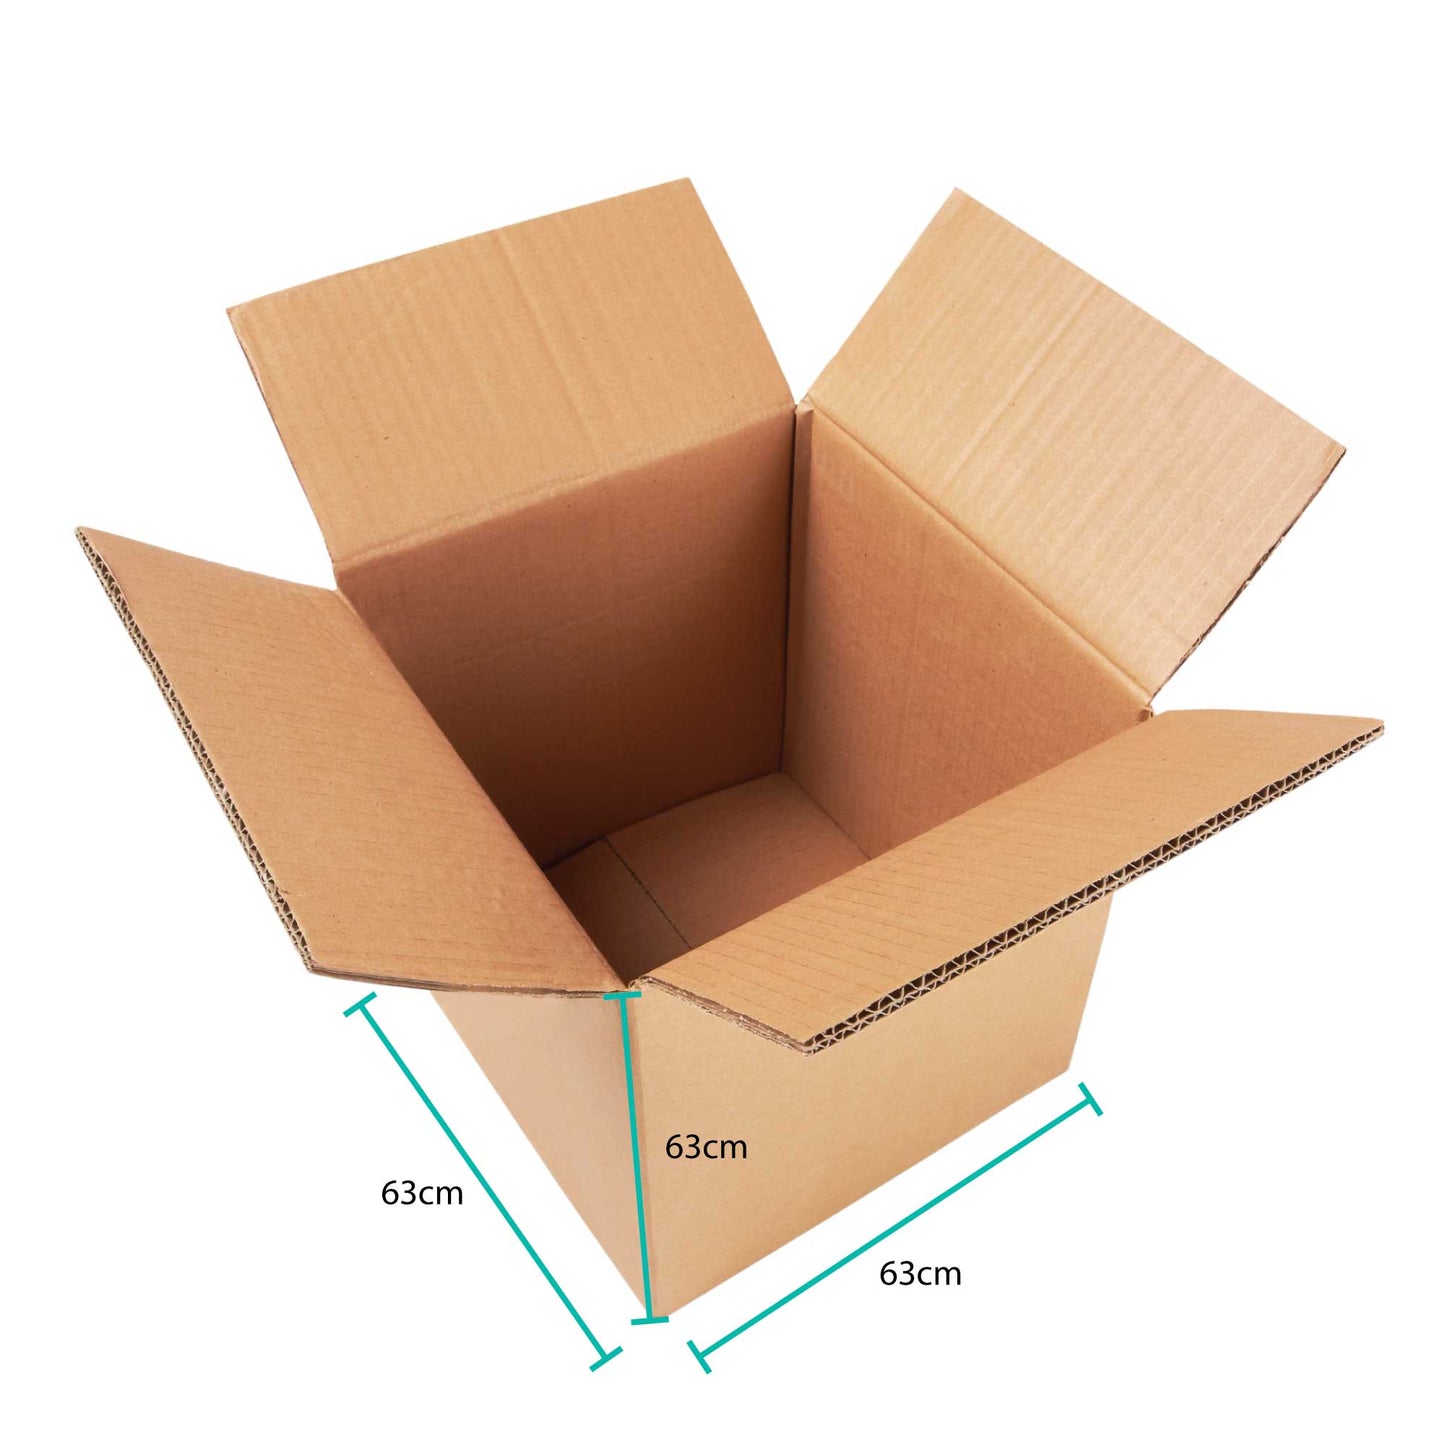 8x Cardboard Boxes 63x63x63cm Large Heavy Duty Strong Moving Packing Carton